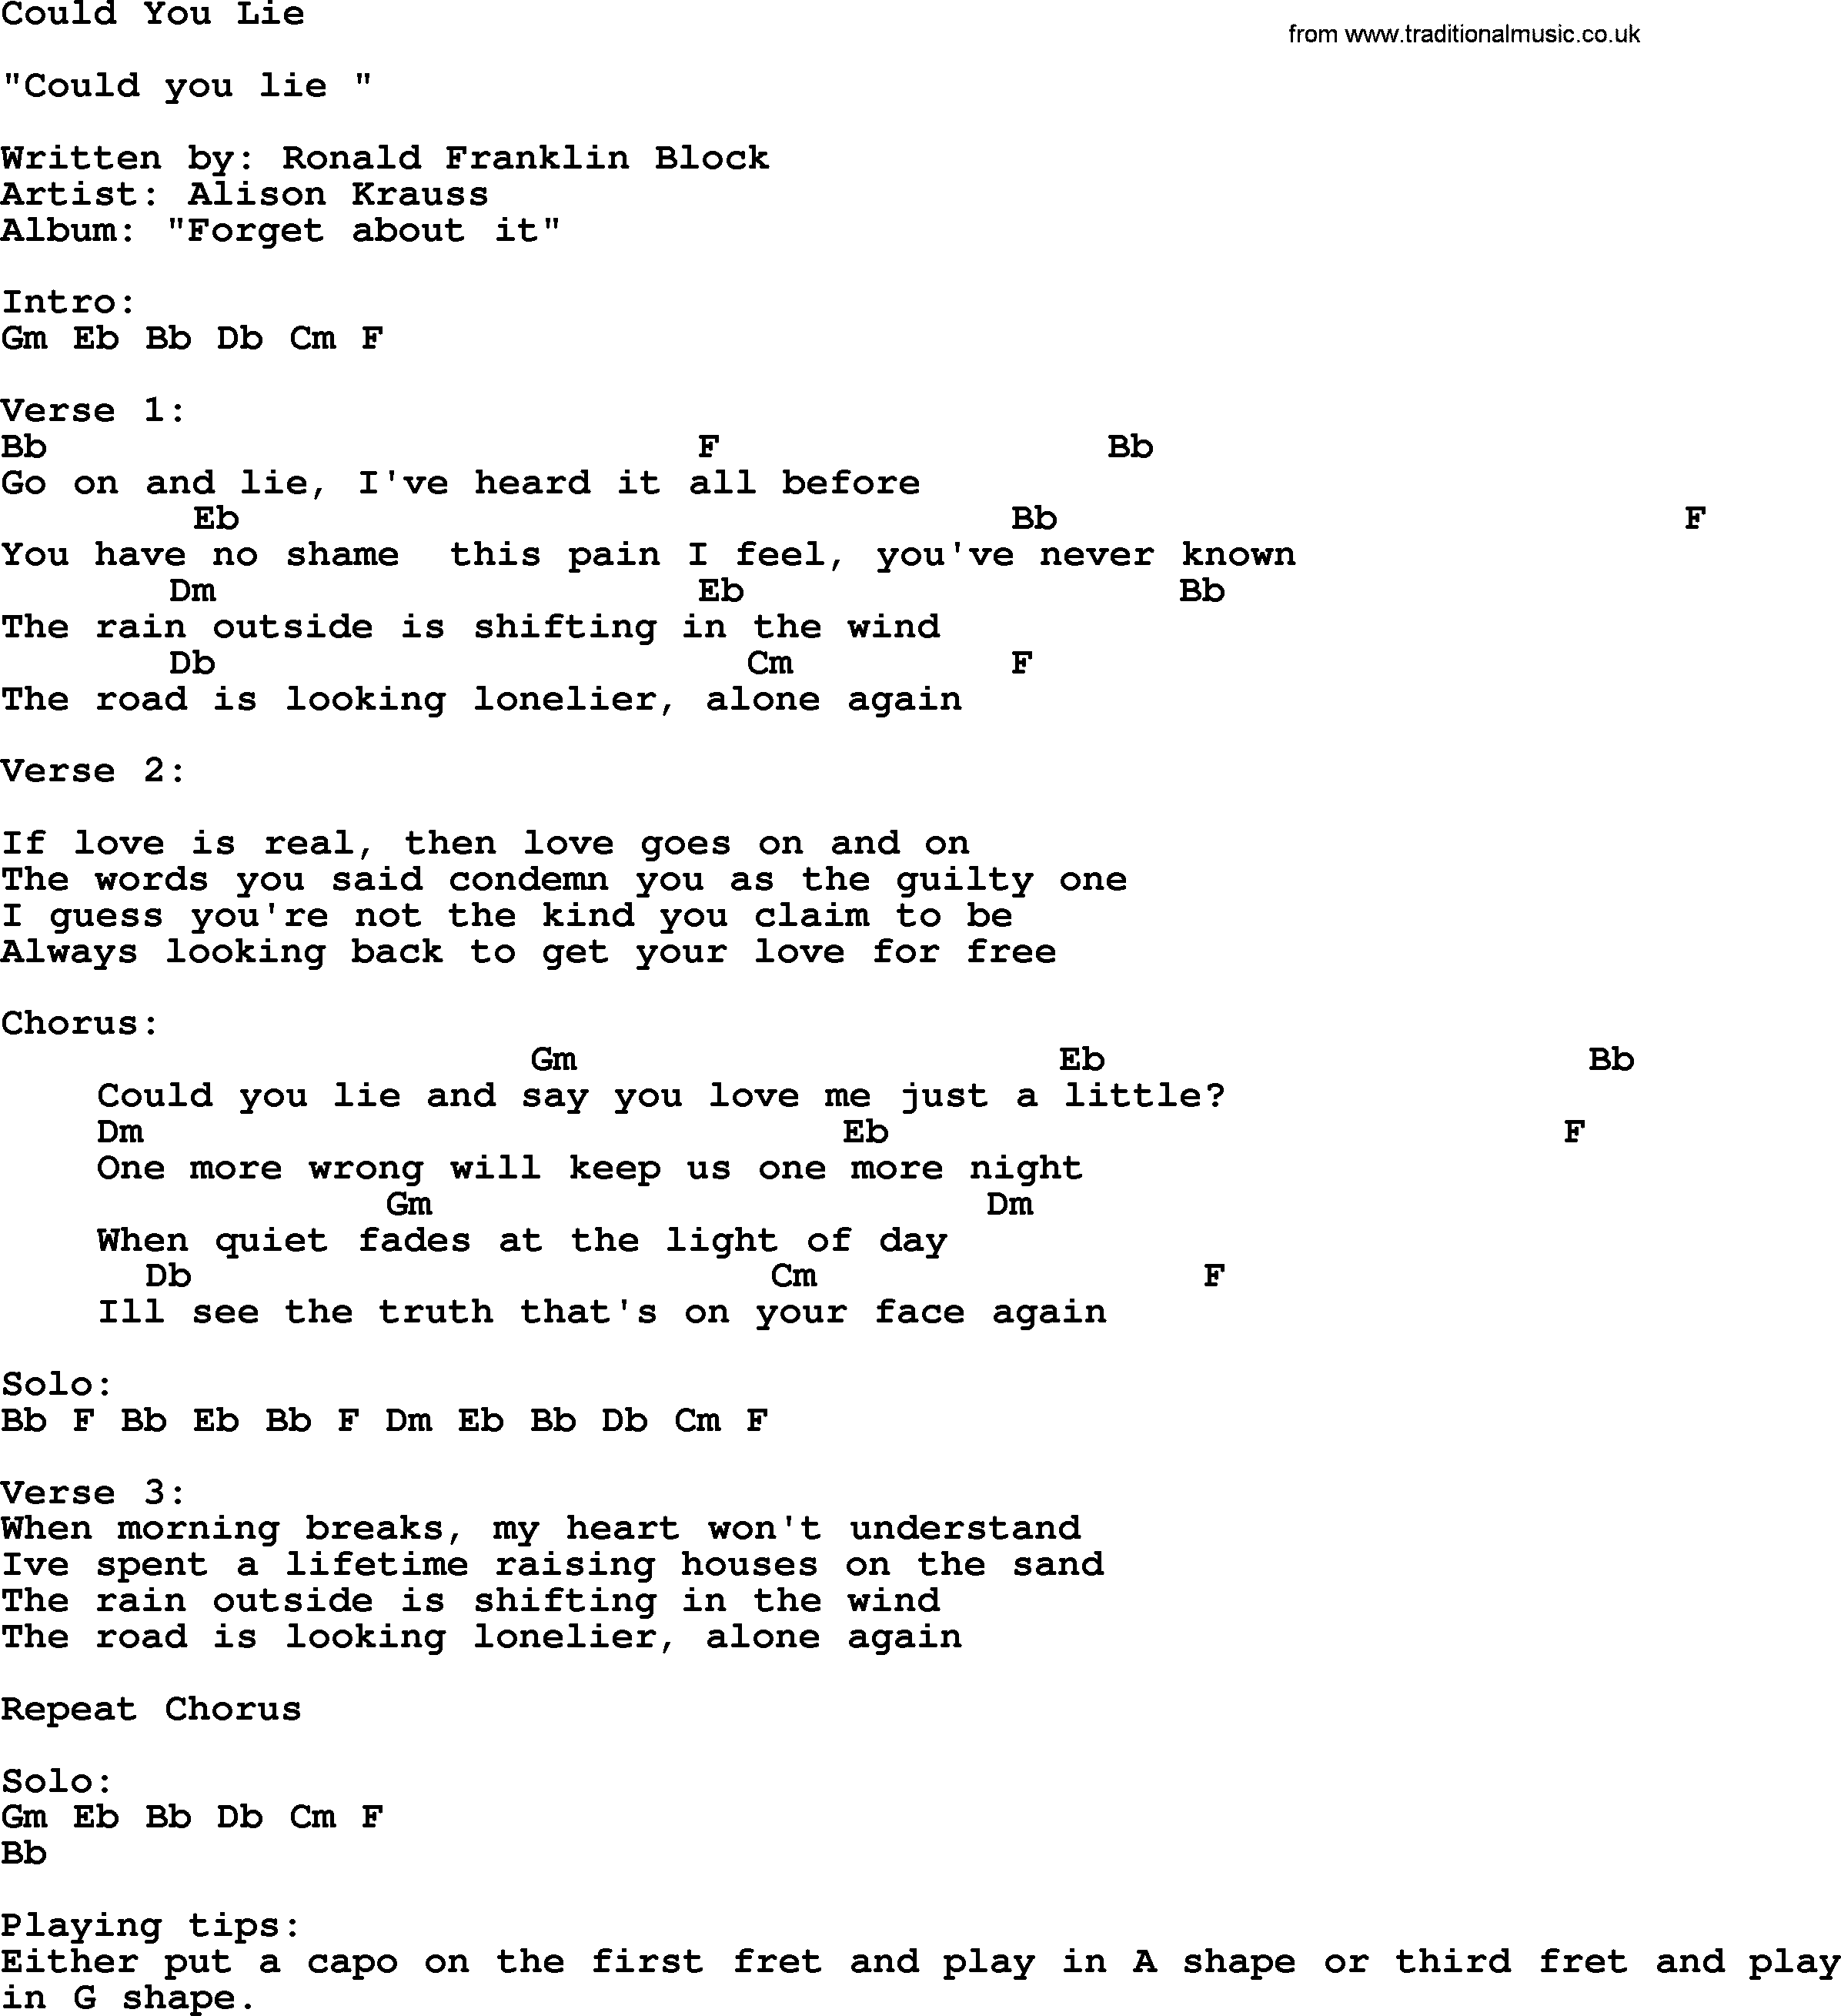 Bluegrass song: Could You Lie, lyrics and chords